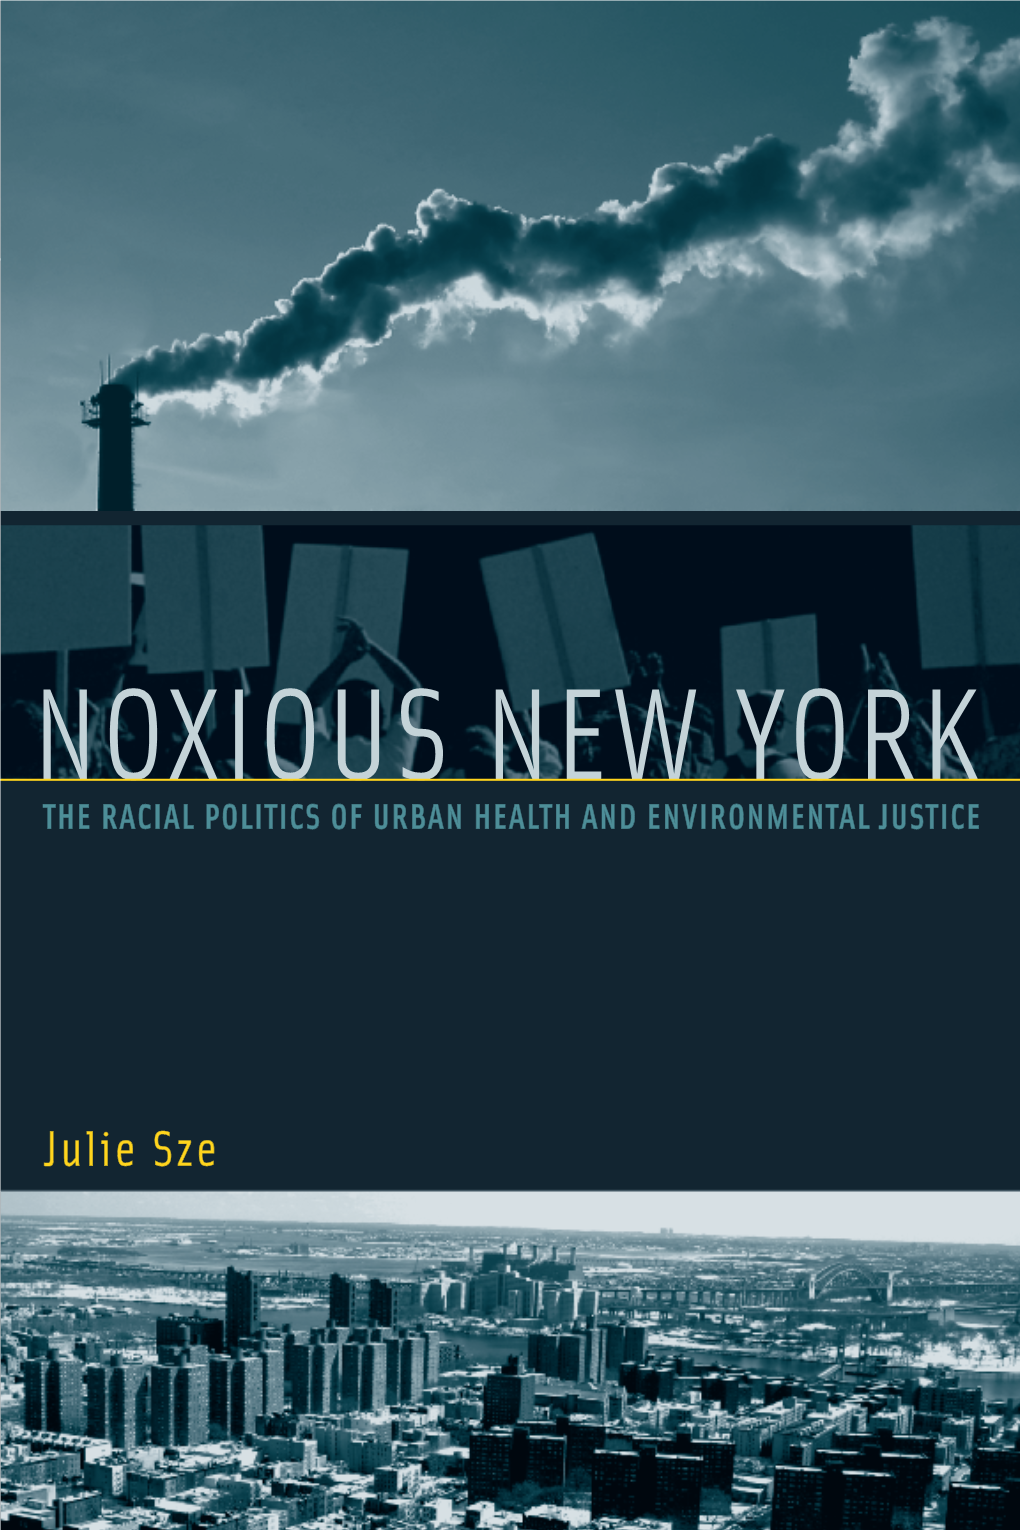 Noxious New York: the Racial Politics of Urban Health and Environmental Justice